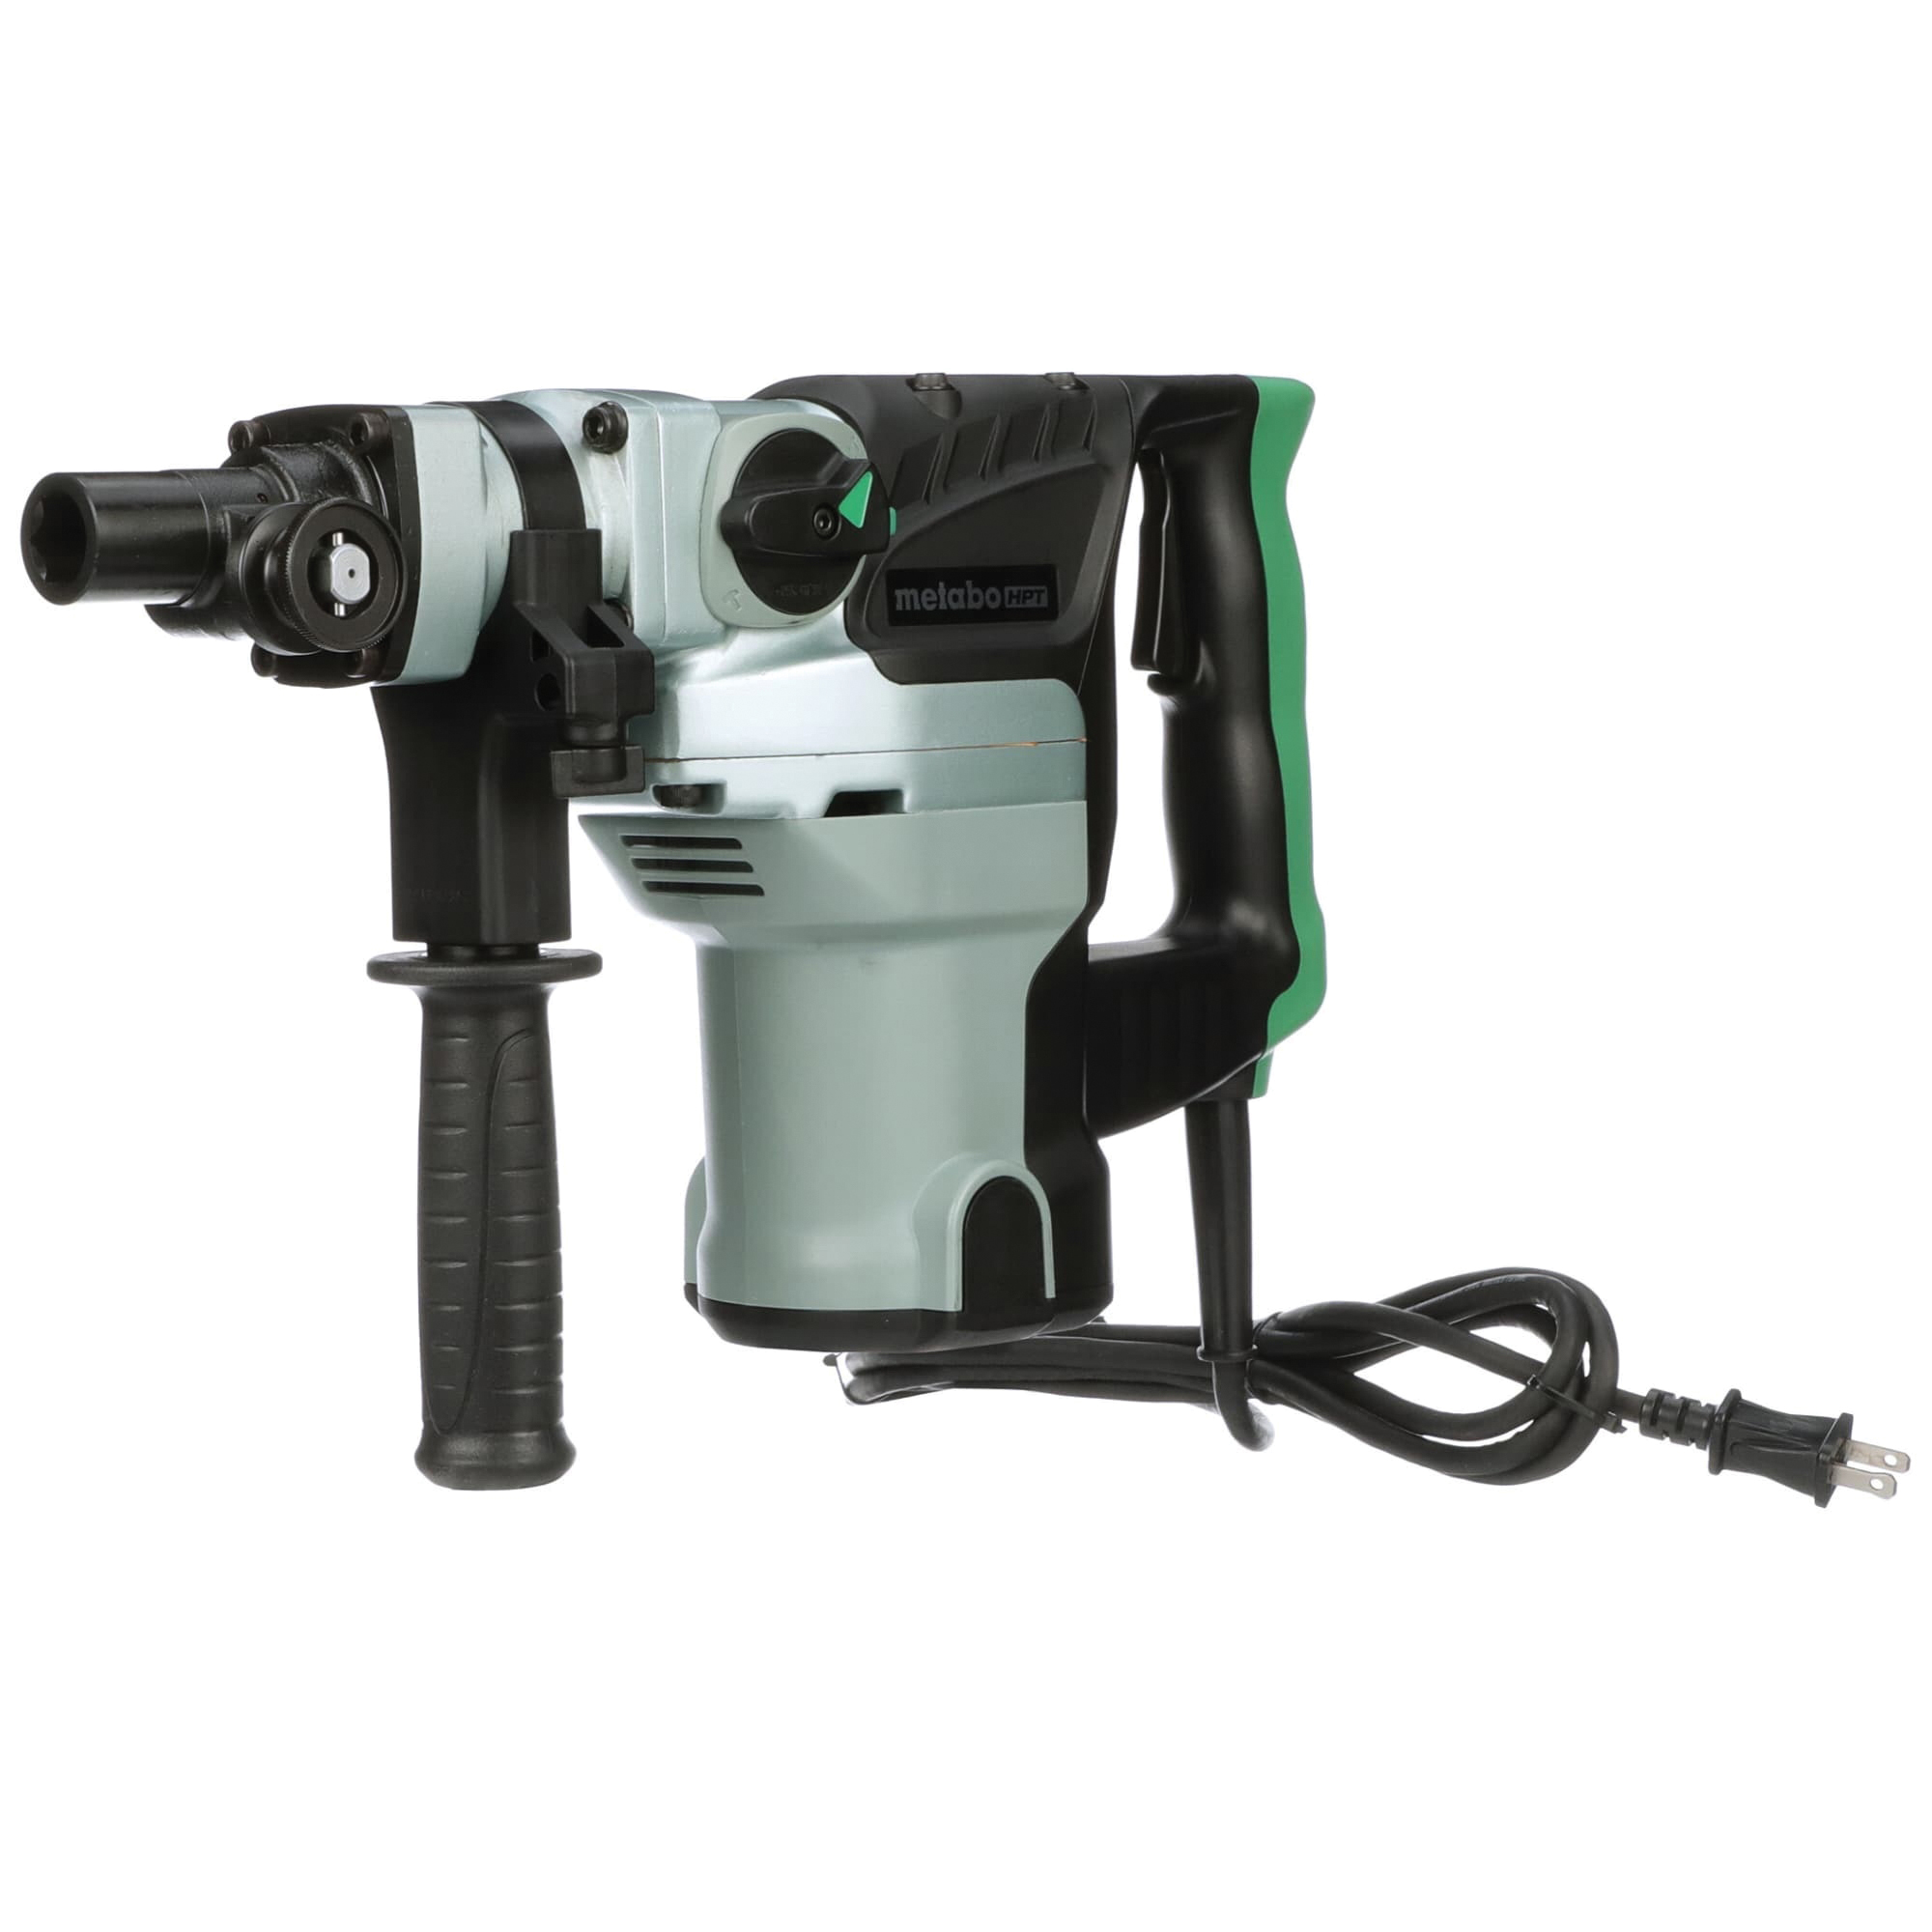 DH38YE2M Rotary Hammer, 8.4 A, 1-1/2 in Chuck, 2800 bpm, 5.9 ft-lb Impact Energy, 620 rpm Speed